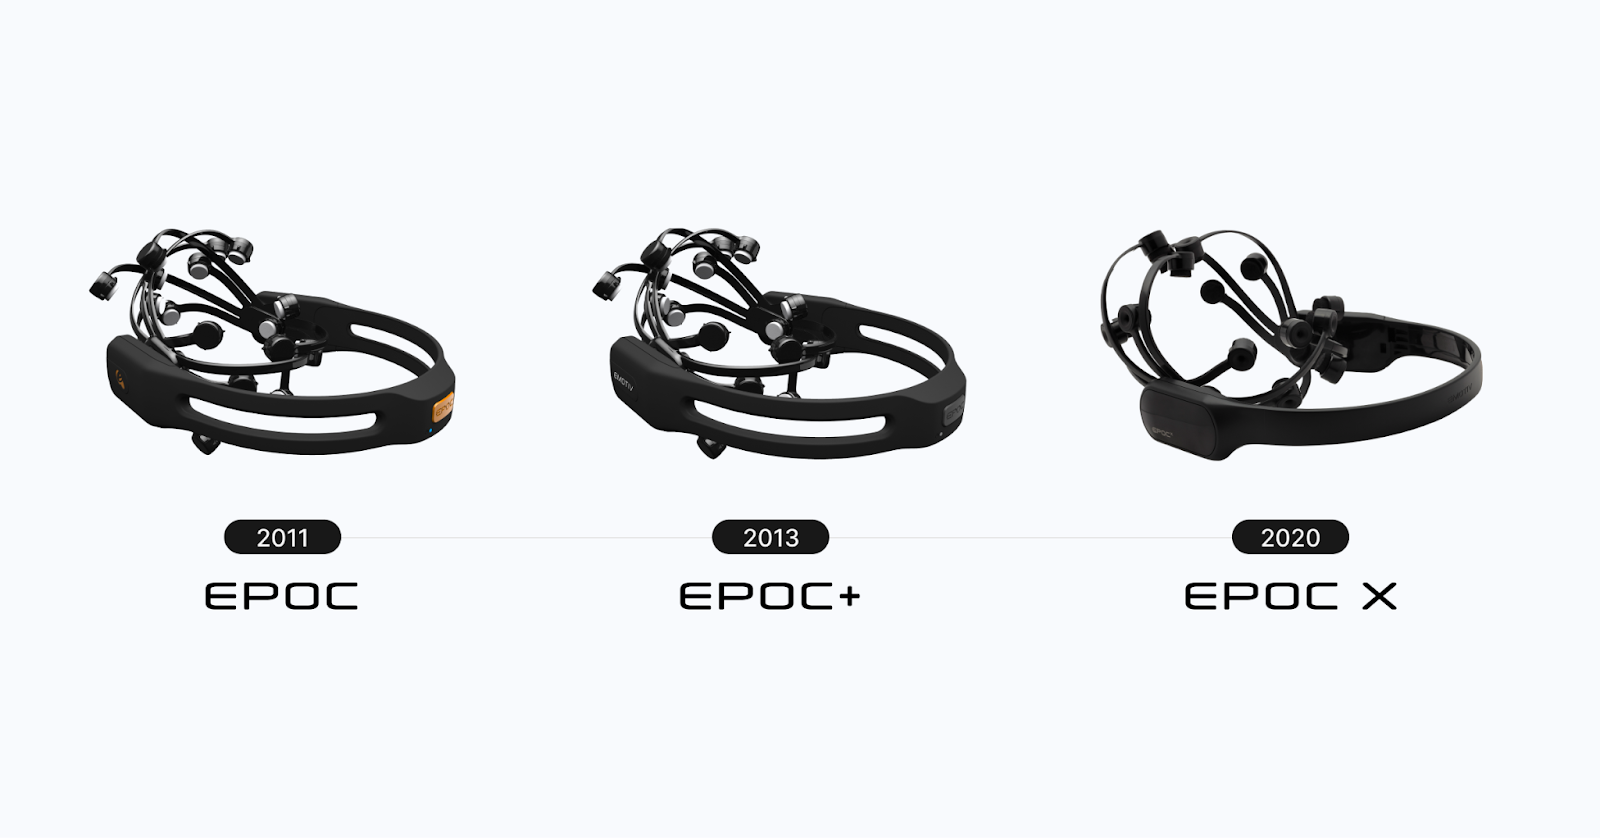 The evolution of the 14-channel EPOC Series EEG headset.